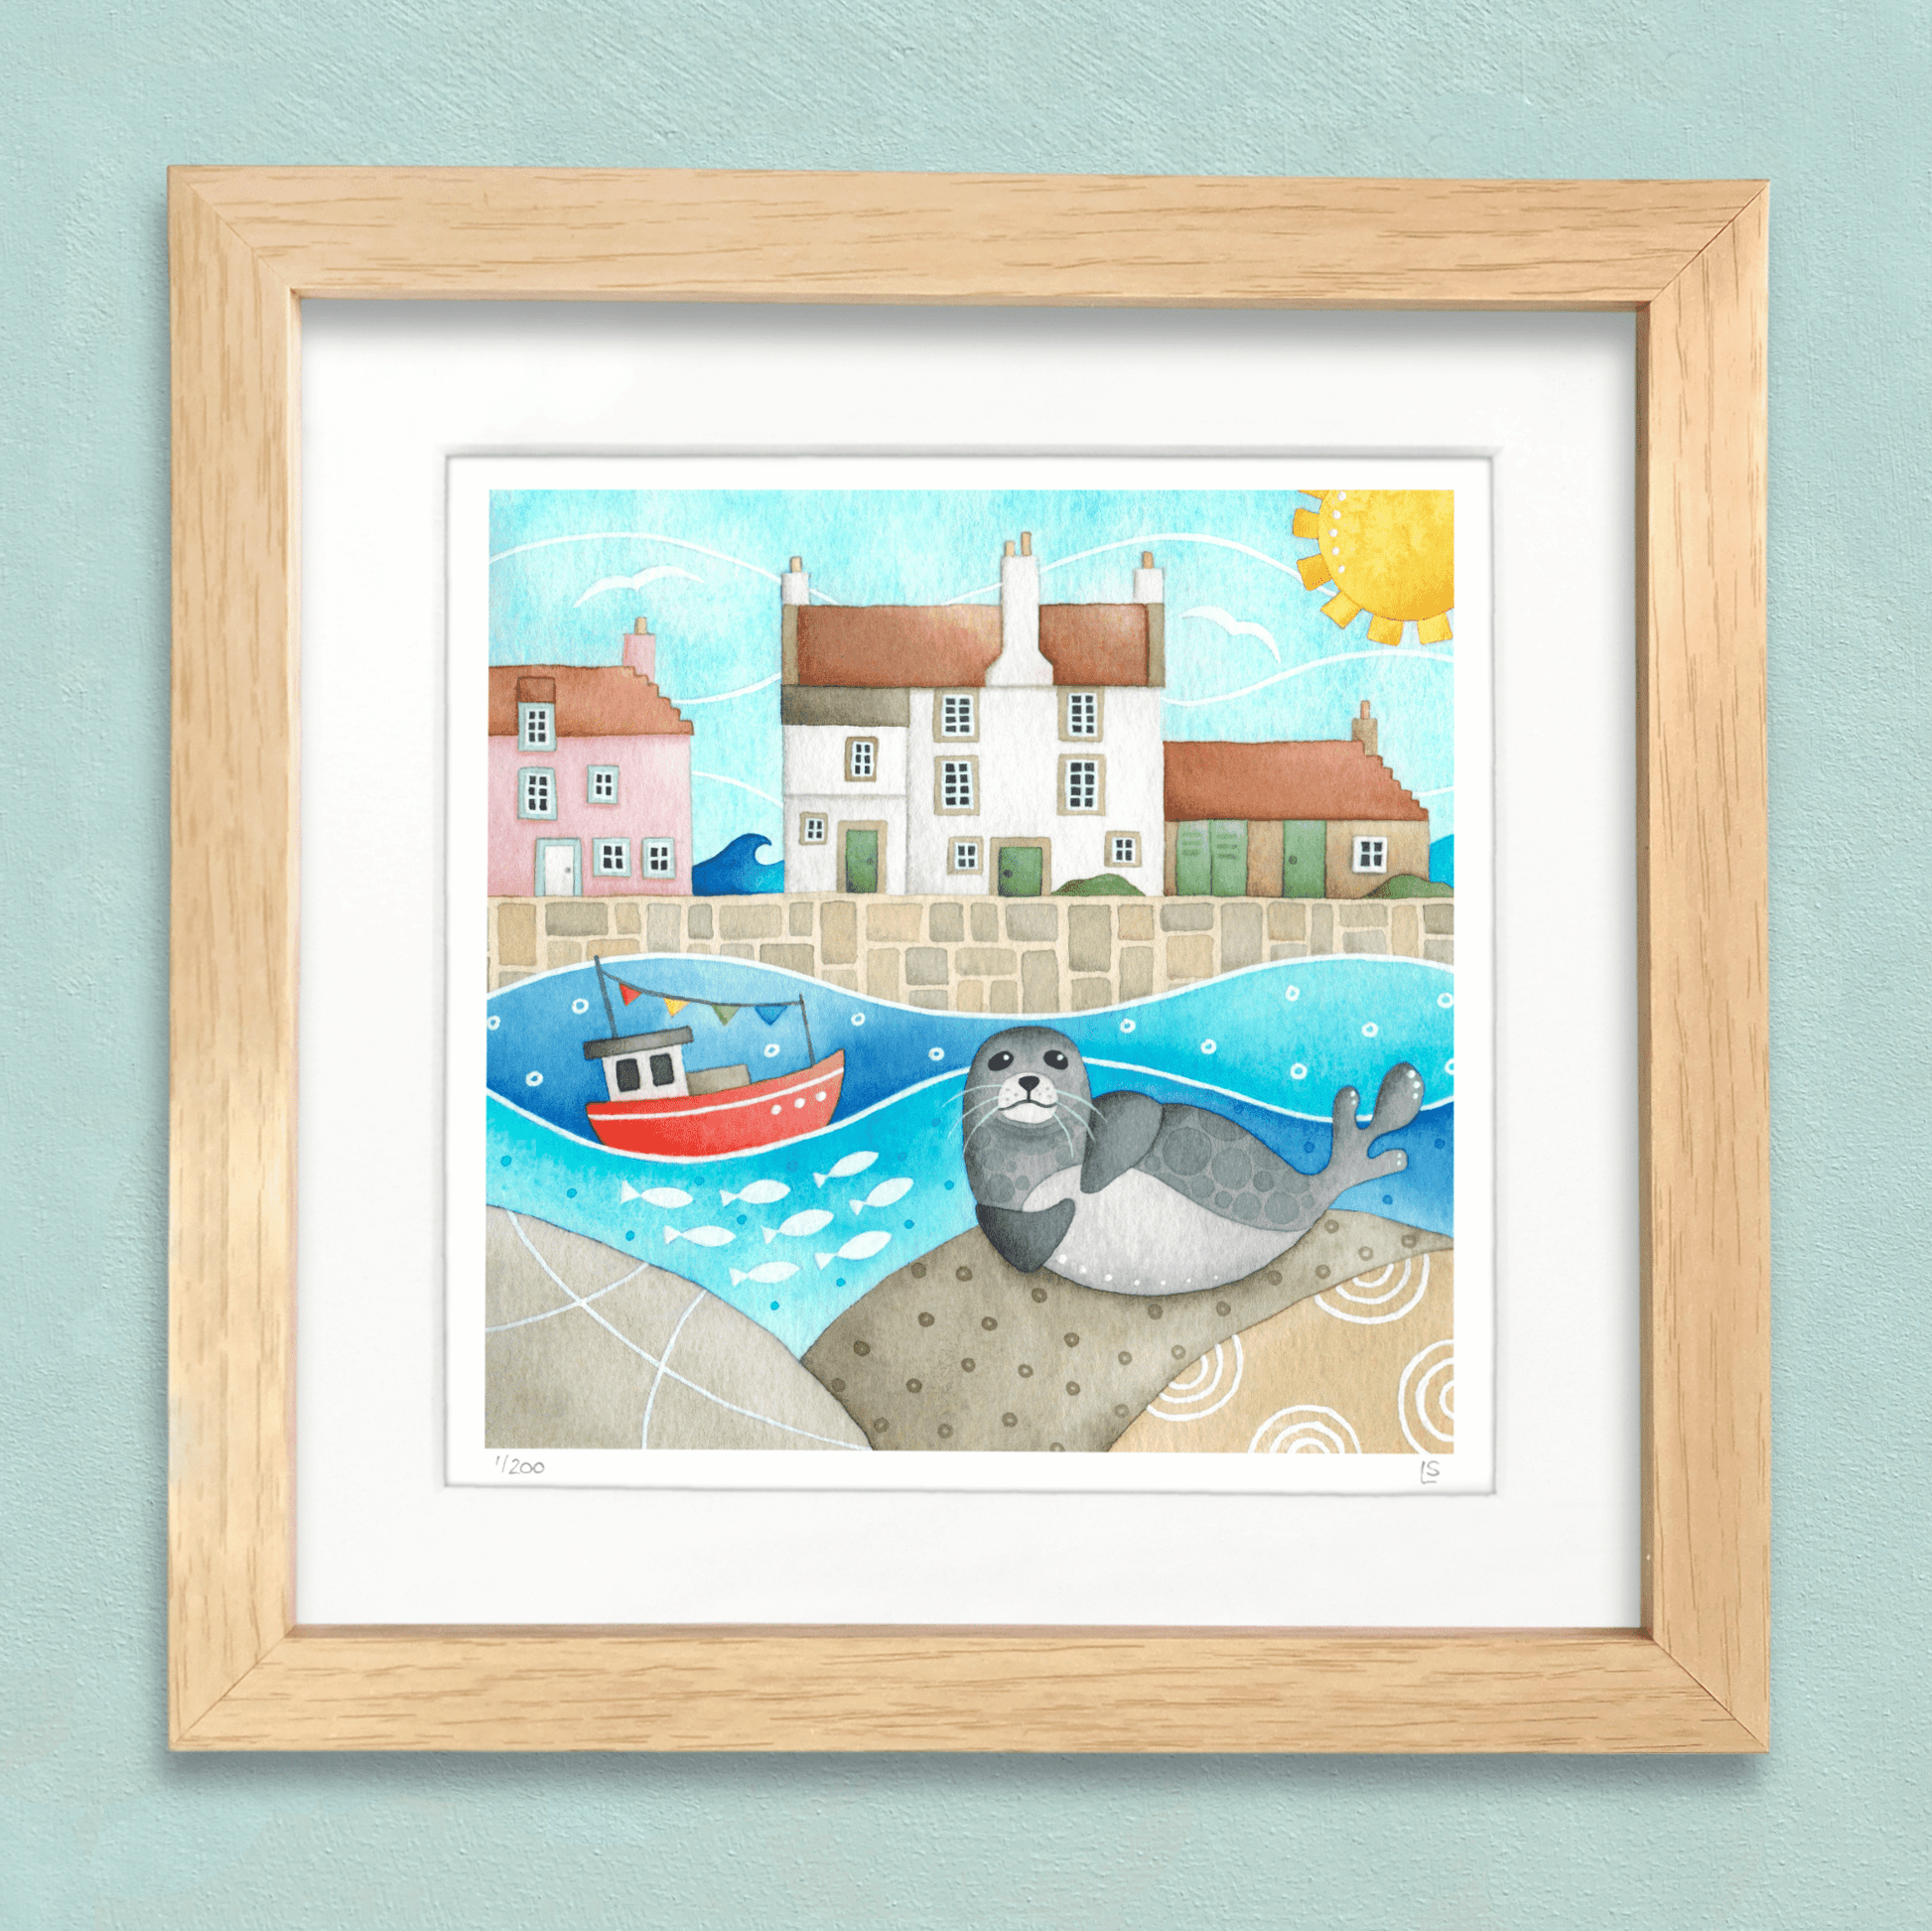 Sammy Seal at Pittenweem Harbour - Seaside Watercolour Painting - Limited Edition Signed Print - East Neuk Beach Crafts